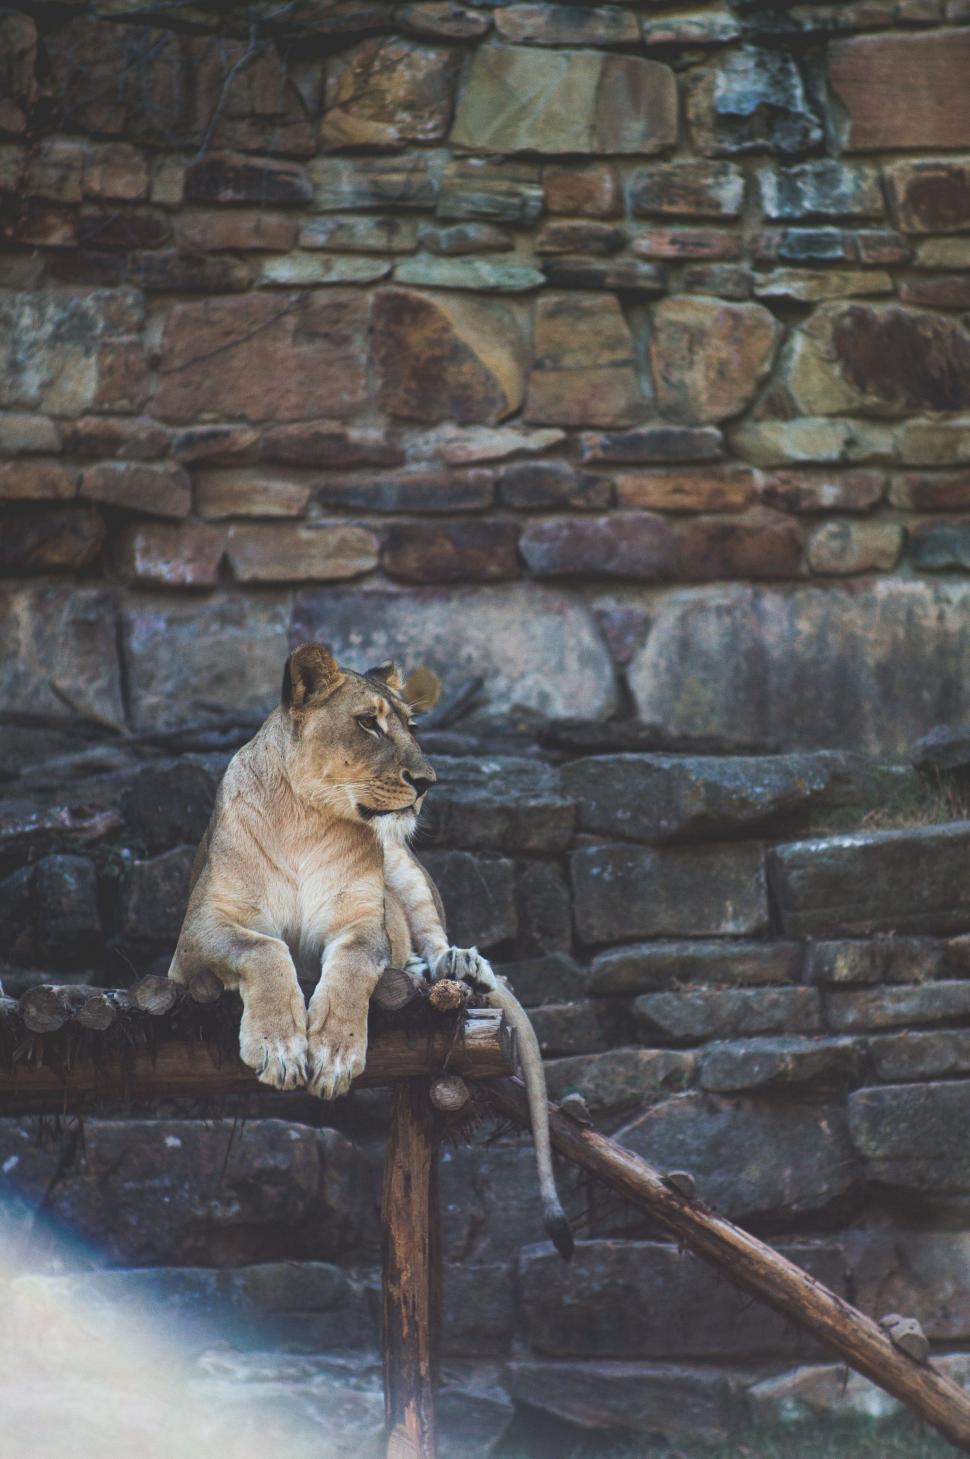 Free Image of Lion Cub Sitting on a Wooden Fence 